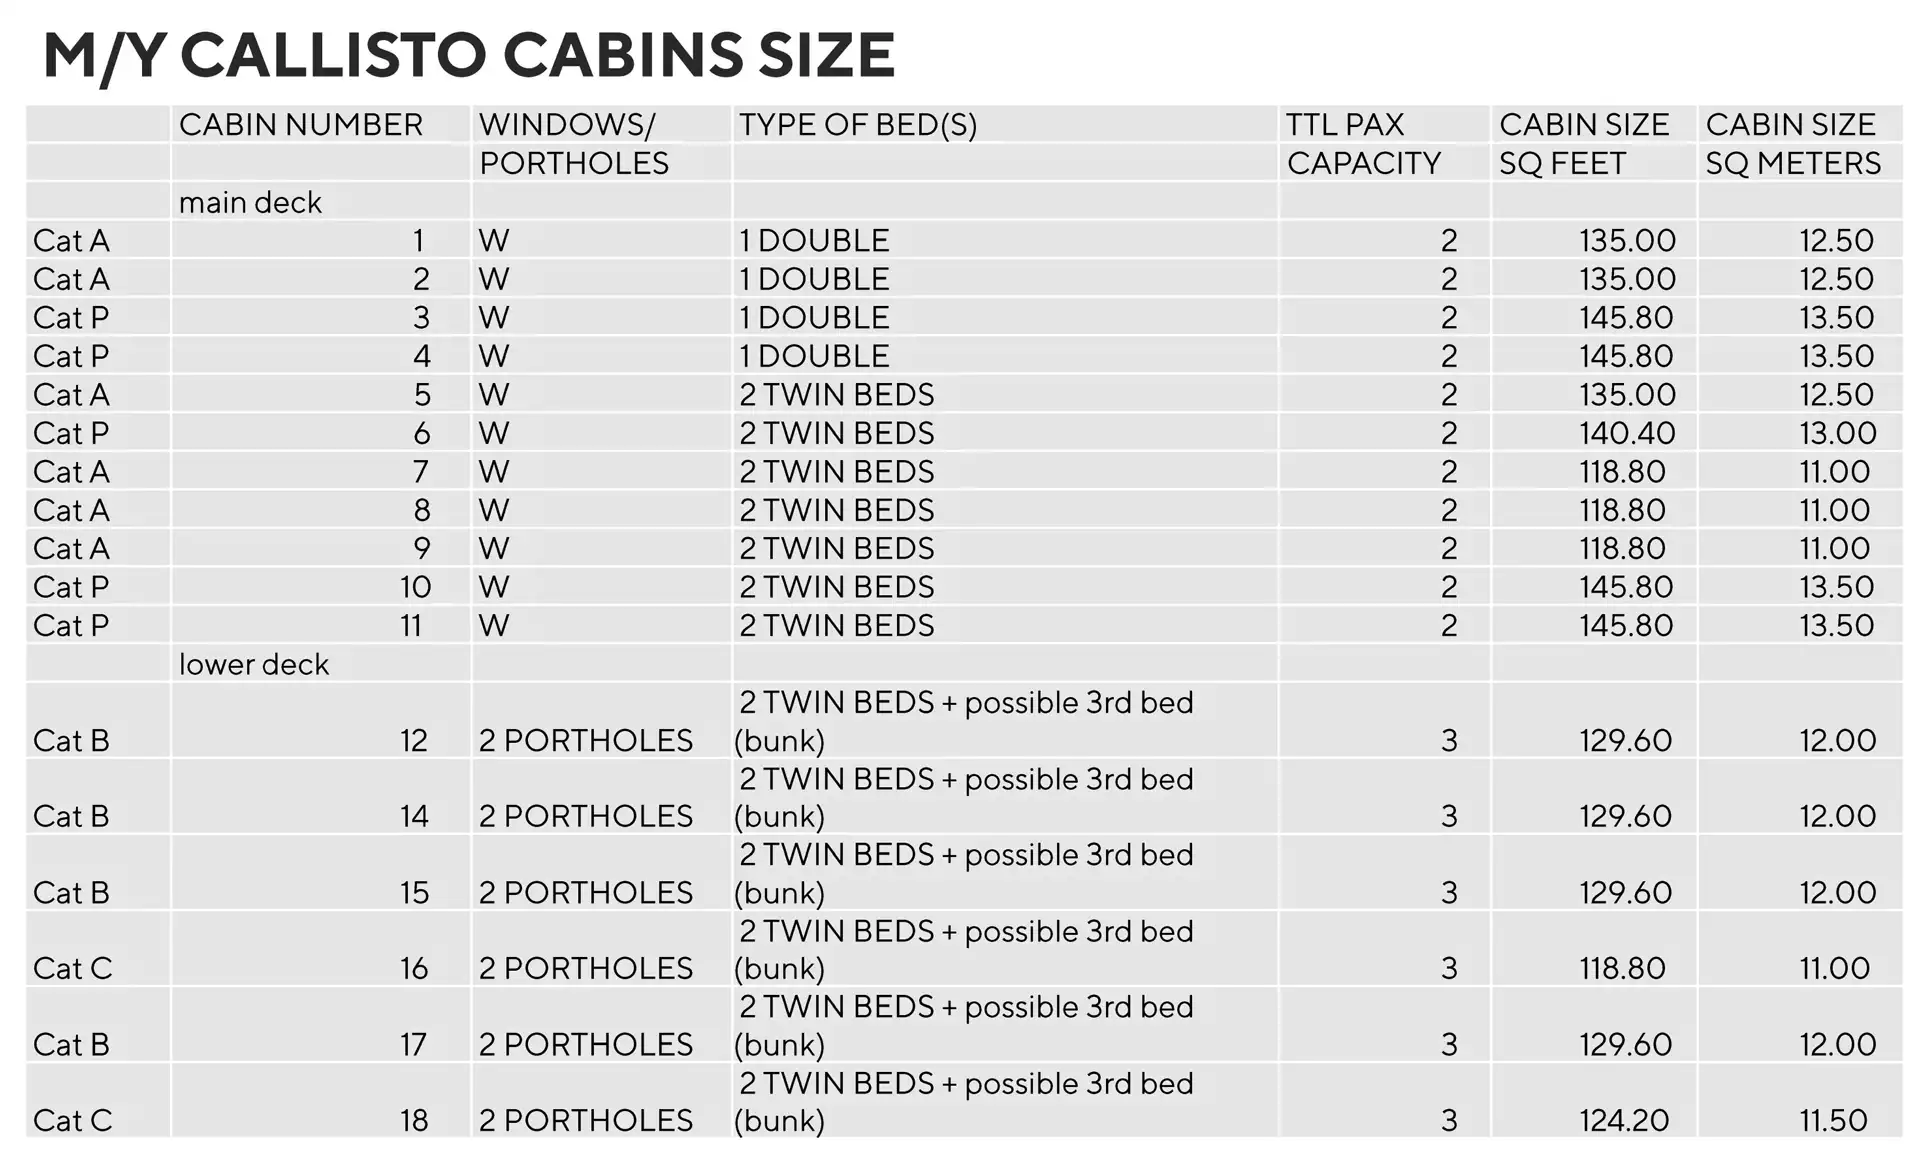 Chart showing cabin specifications including bedding configurations, size & capacity for motor yacht Callisto.